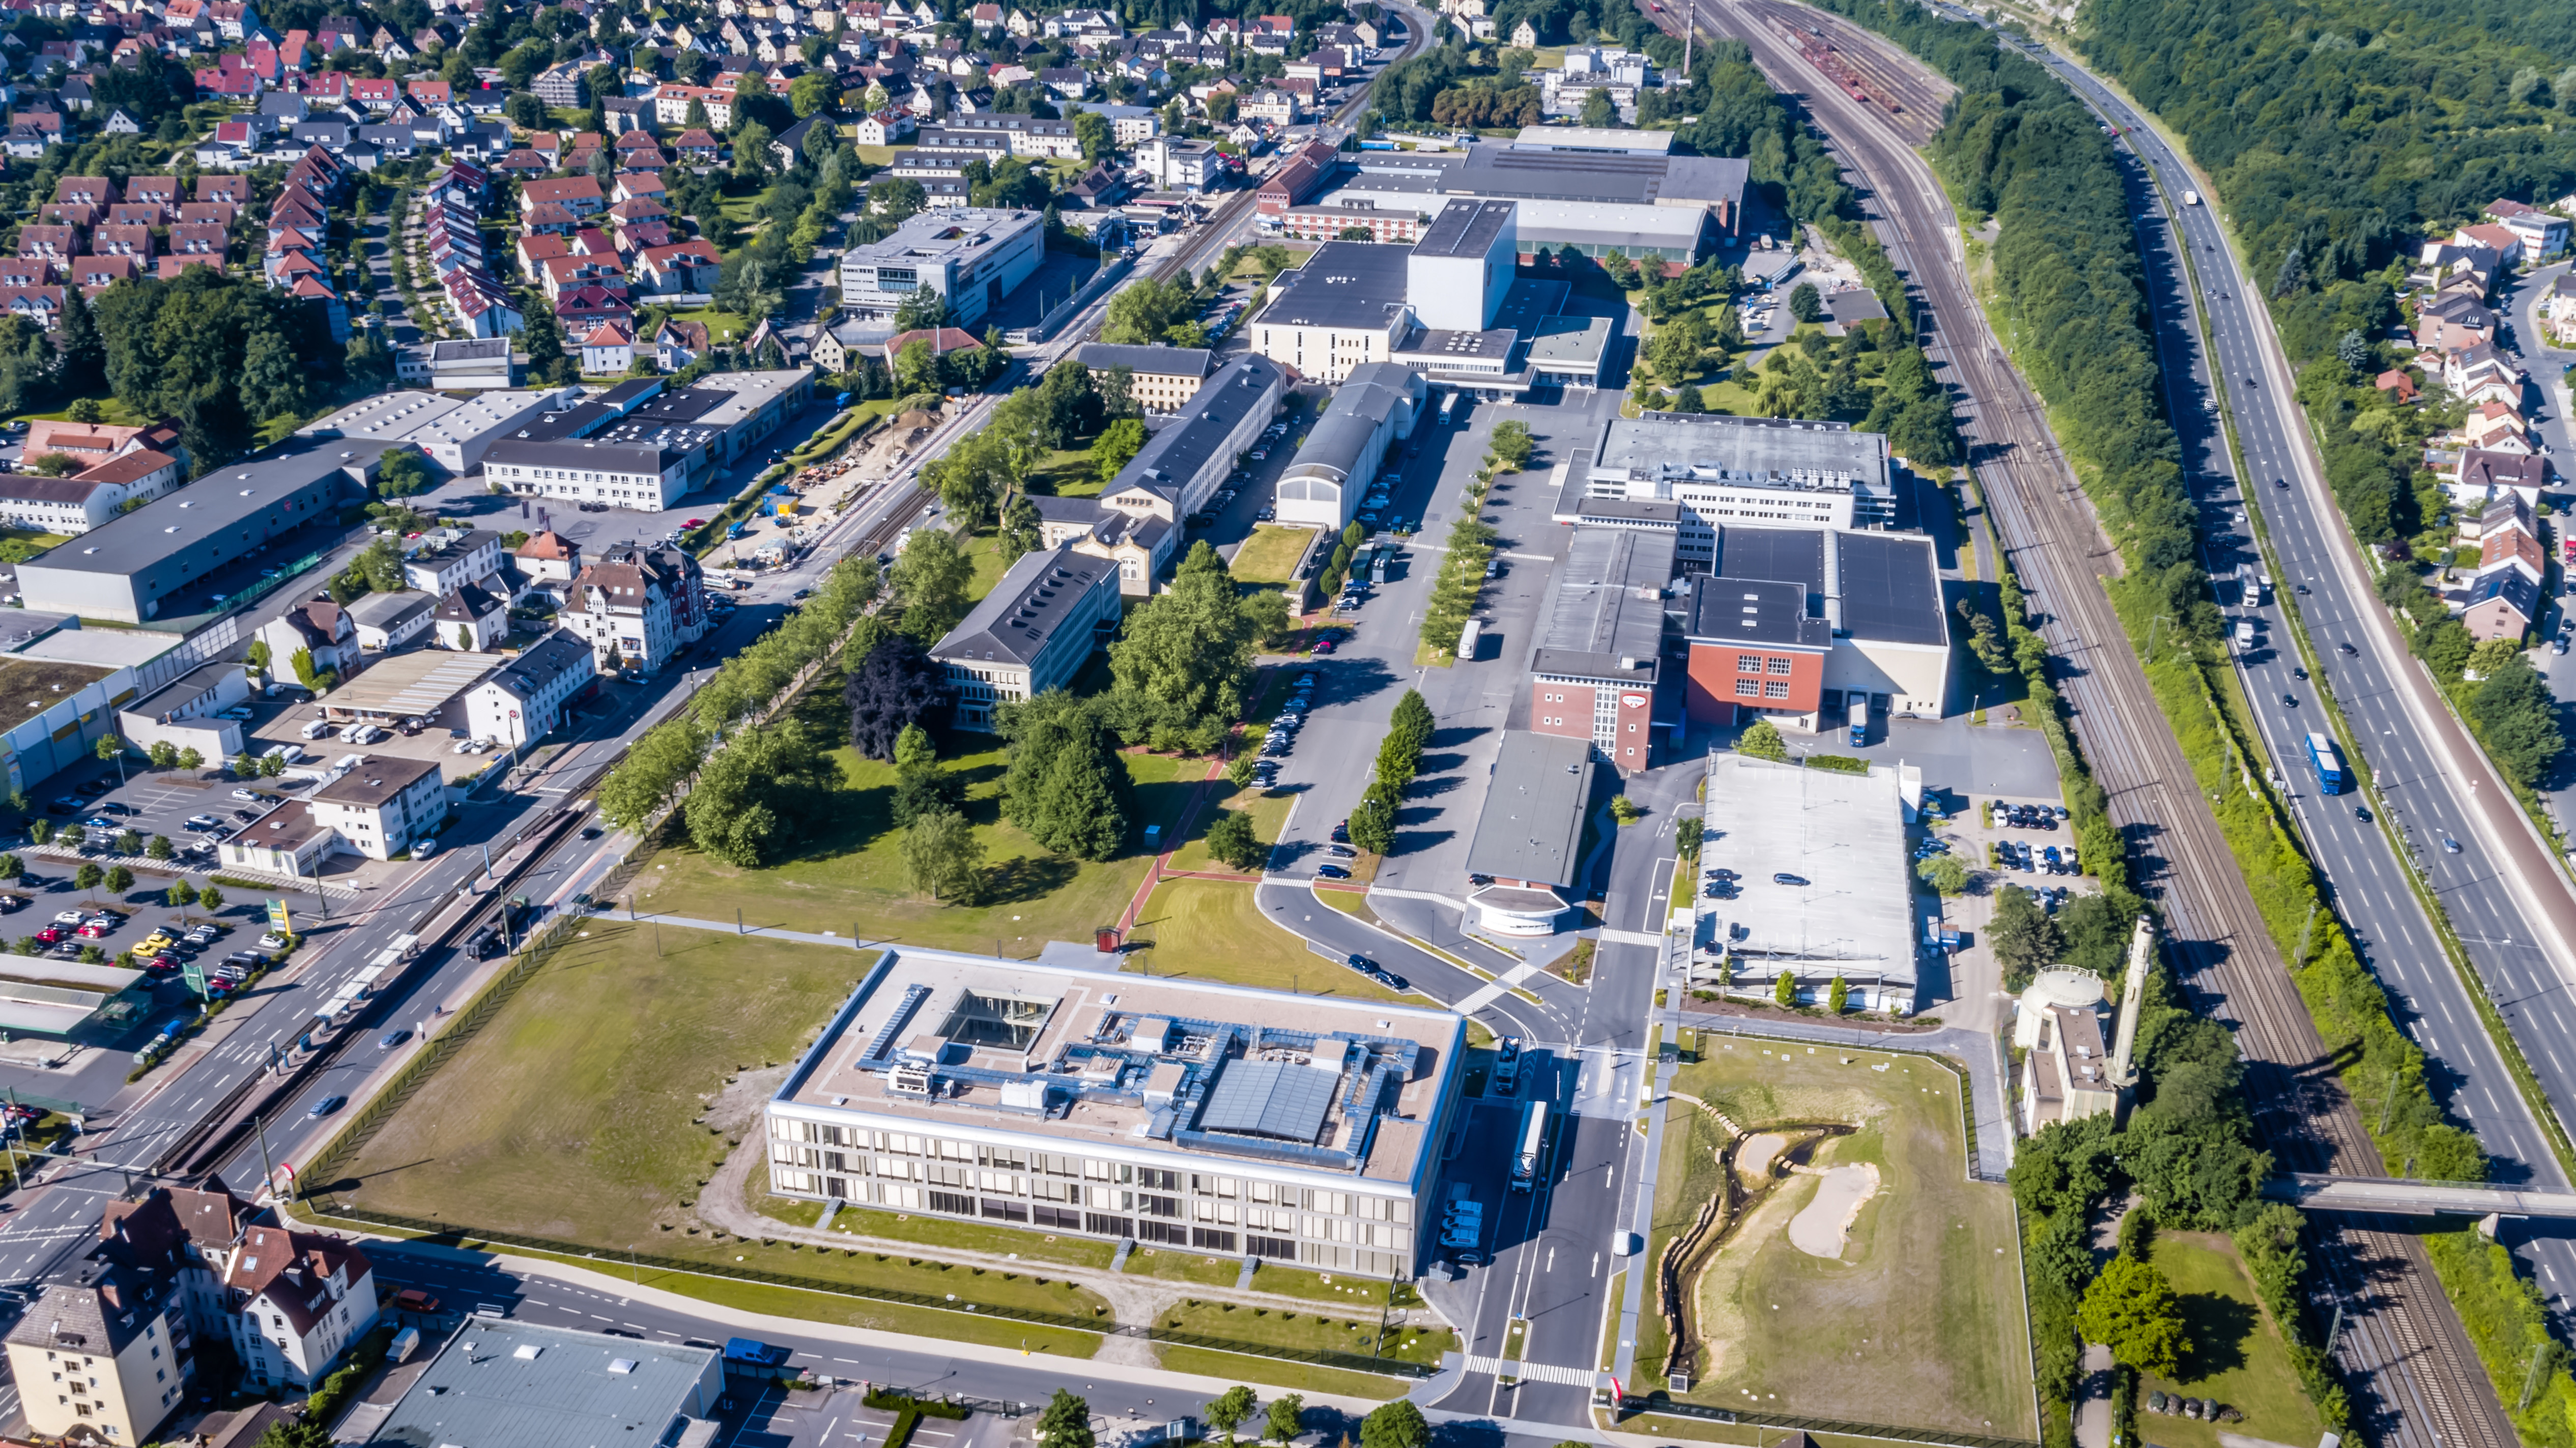 Dr. Oetker Plant Bielefeld and R+D Center Aerial View